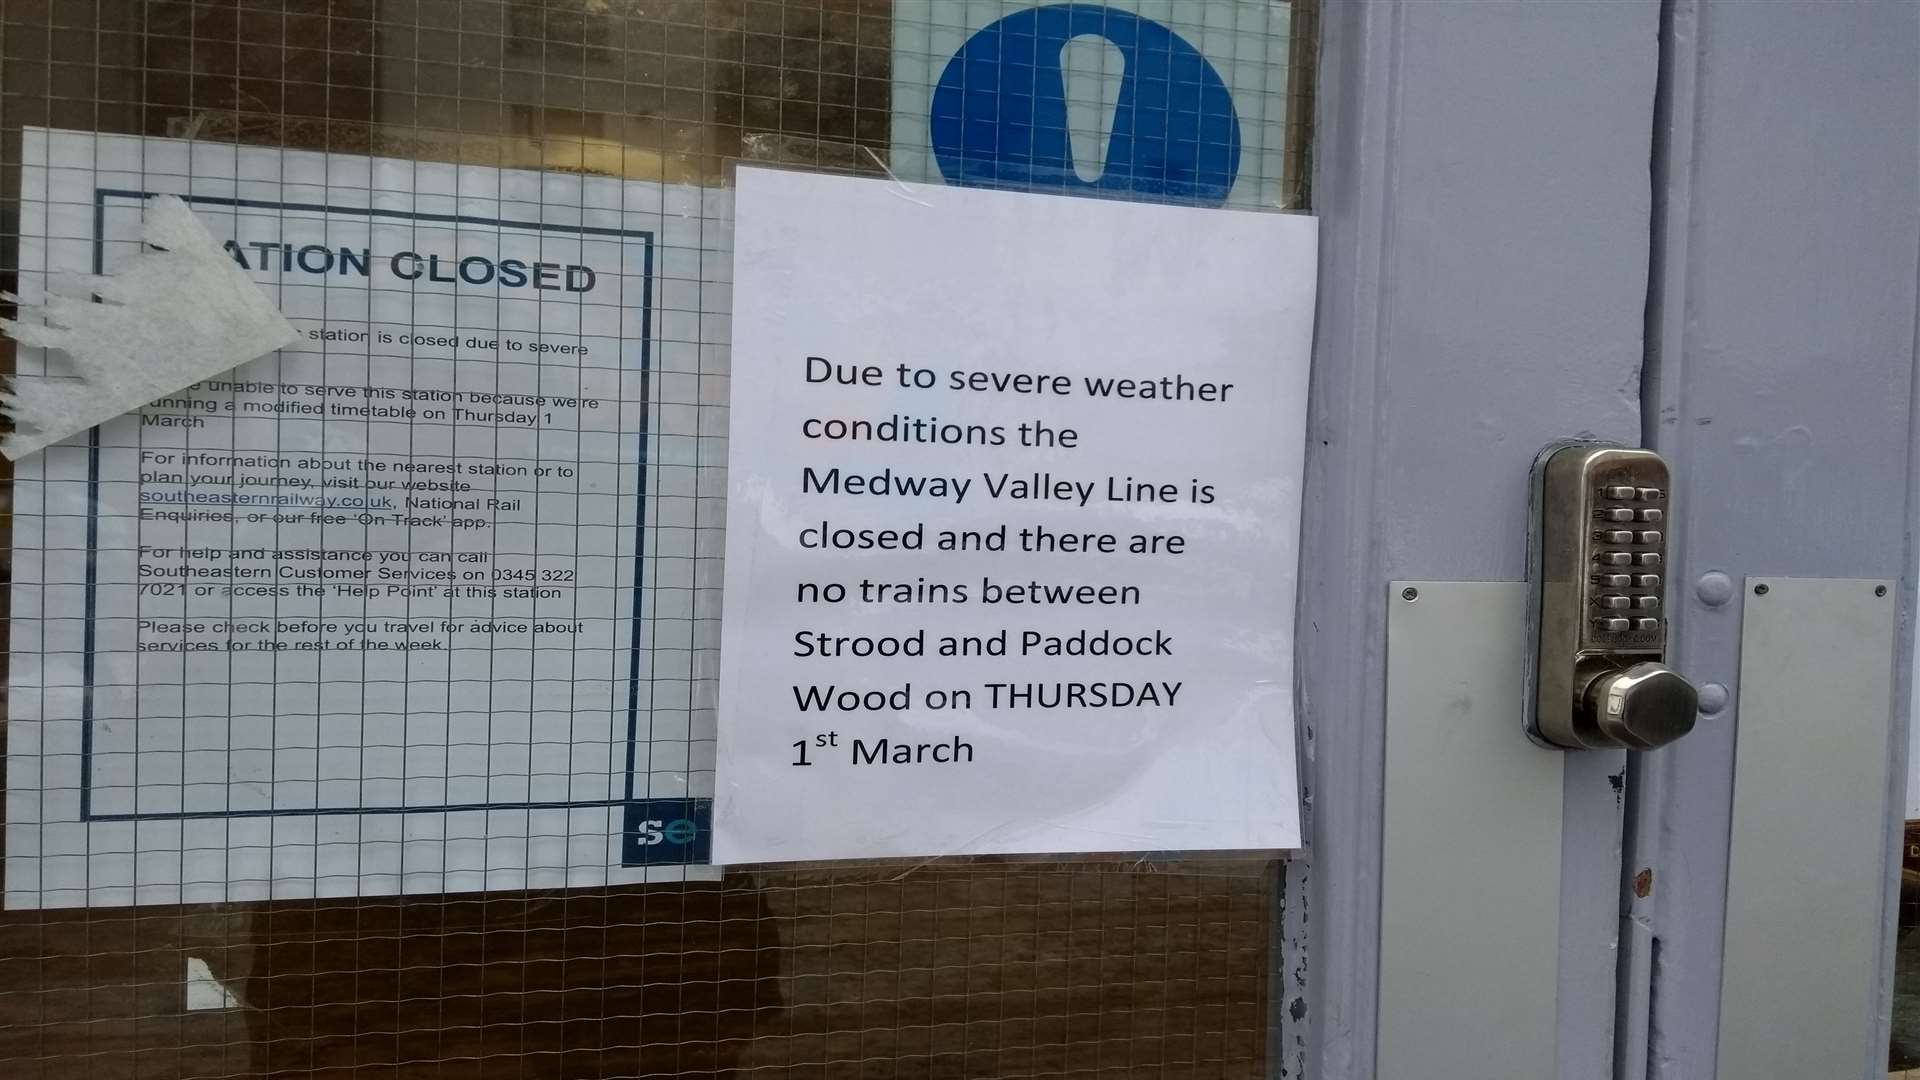 Customers arrived to find that closures were posted on the station door